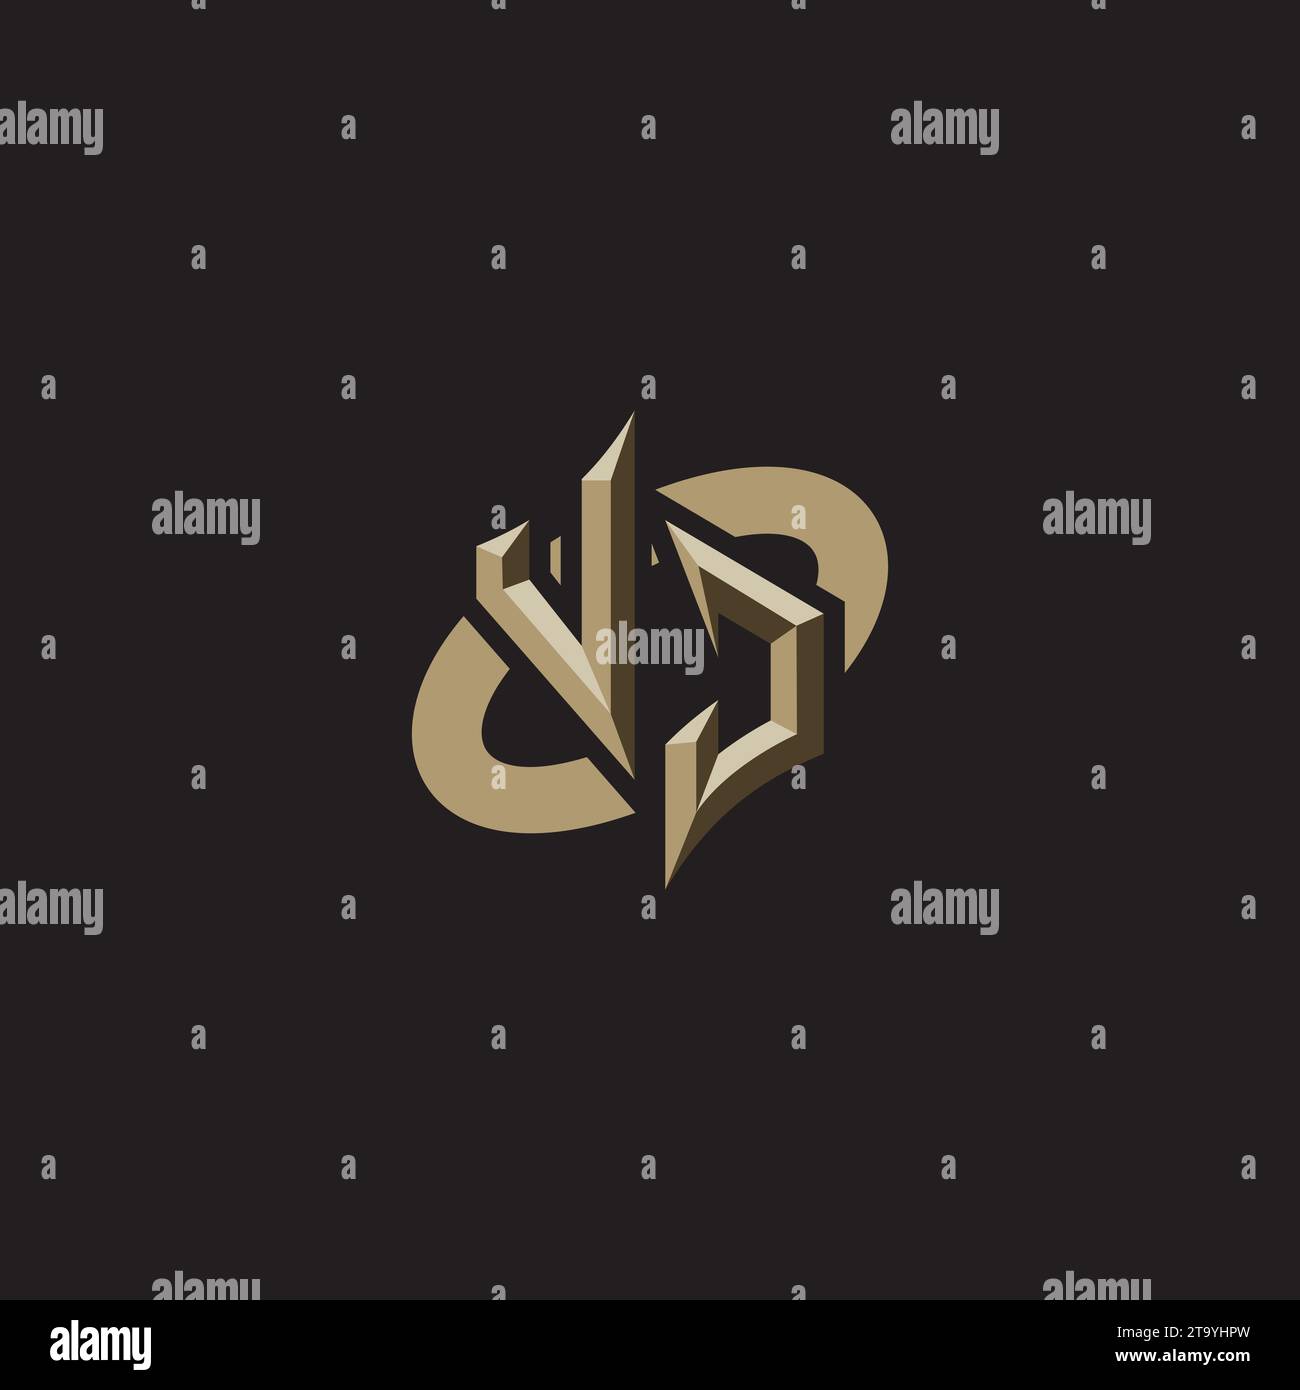 VJ Premium Initial Gaming Logo designs, themes and templates for gaming, twitch and youtube Stock Vector